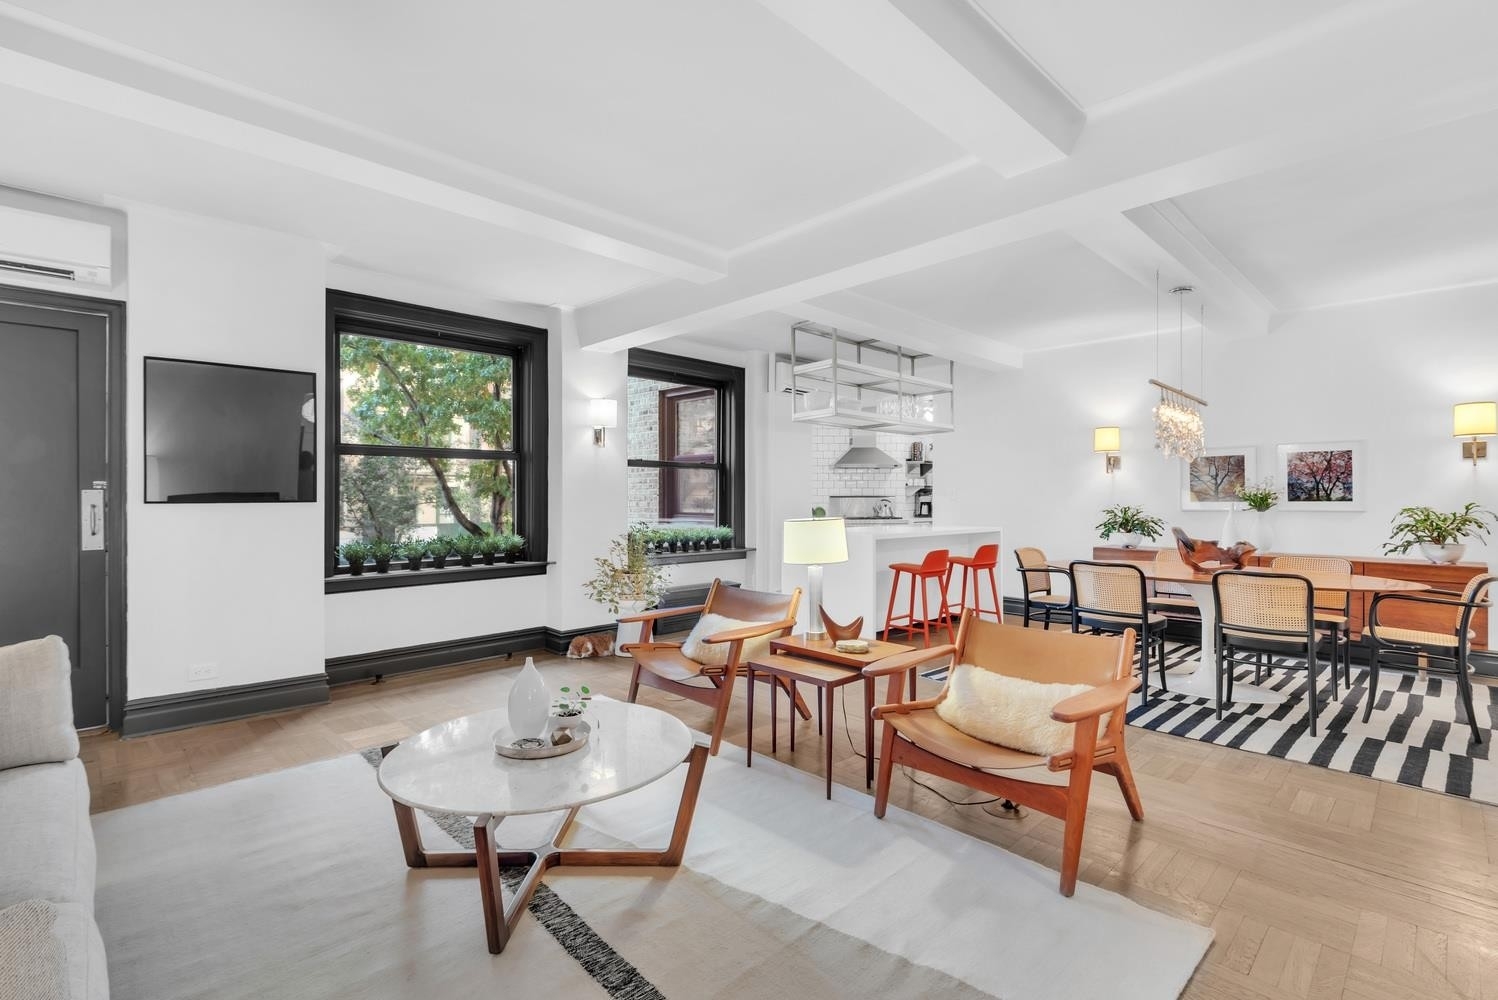 Co-op Properties for Sale at 107 W 86TH ST, 2E Upper West Side, New York, New York 10024